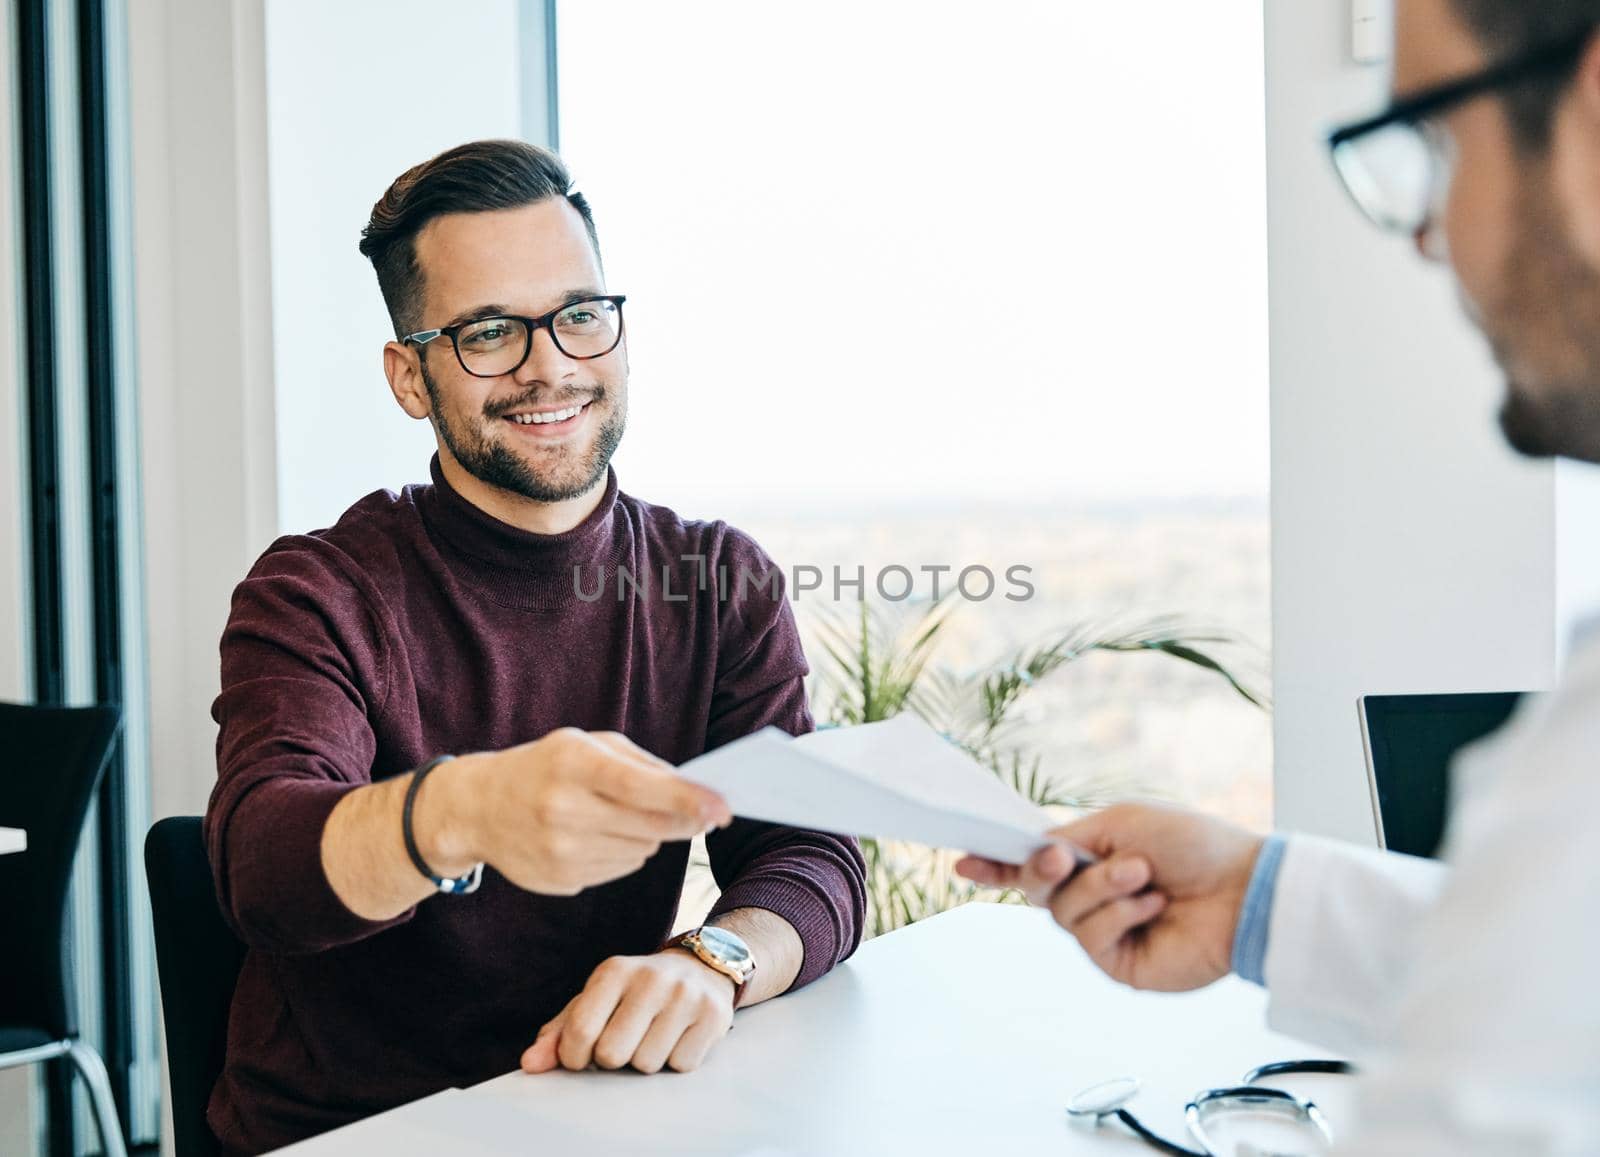 portrait of a young man holding papers or contract during a meeting in the office ot patient with doctor in hoispital